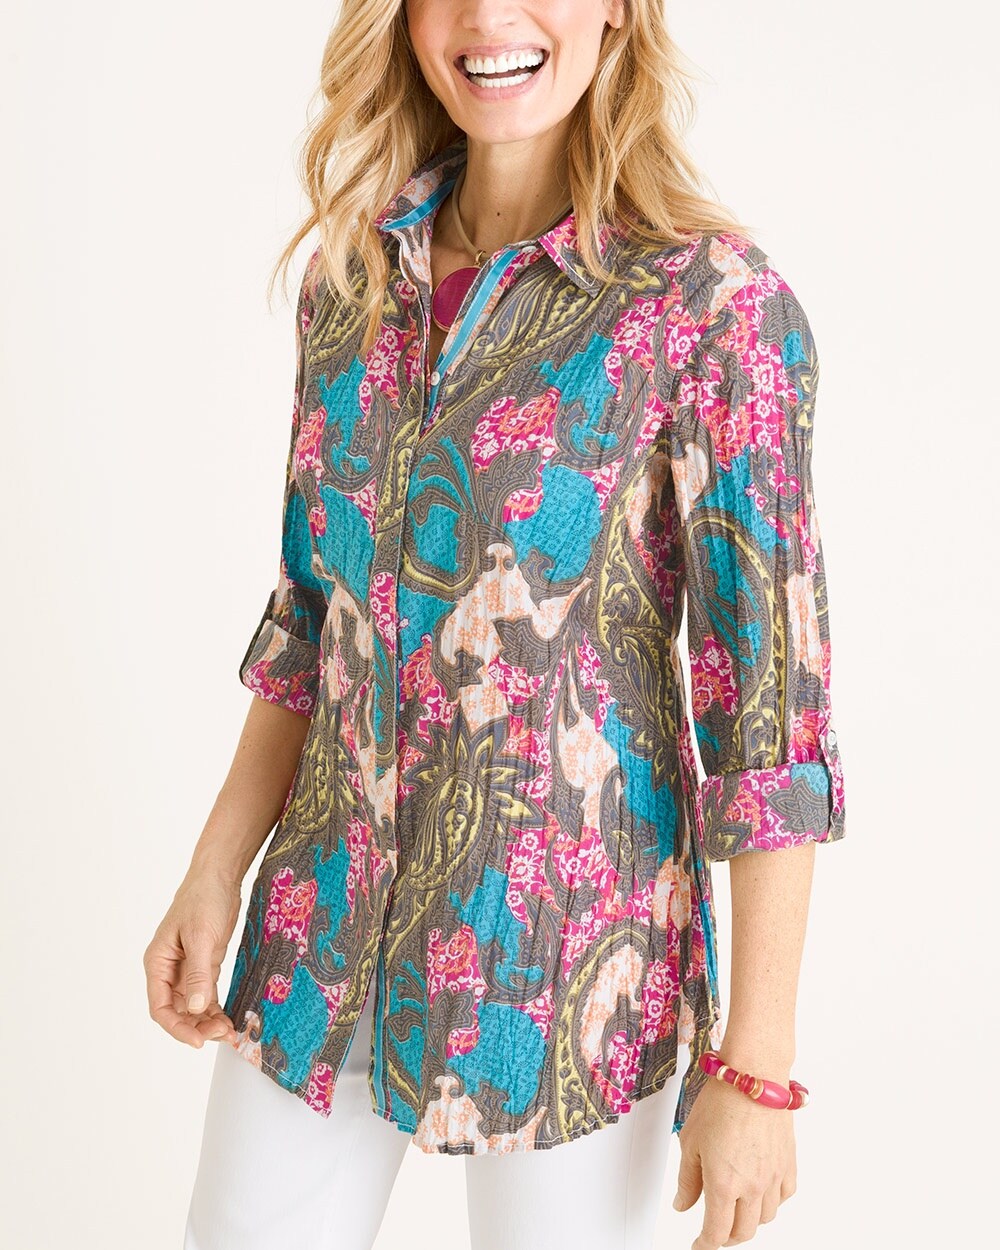 CINO for Chico's Multi-Colored Paisley Crinkle Tunic